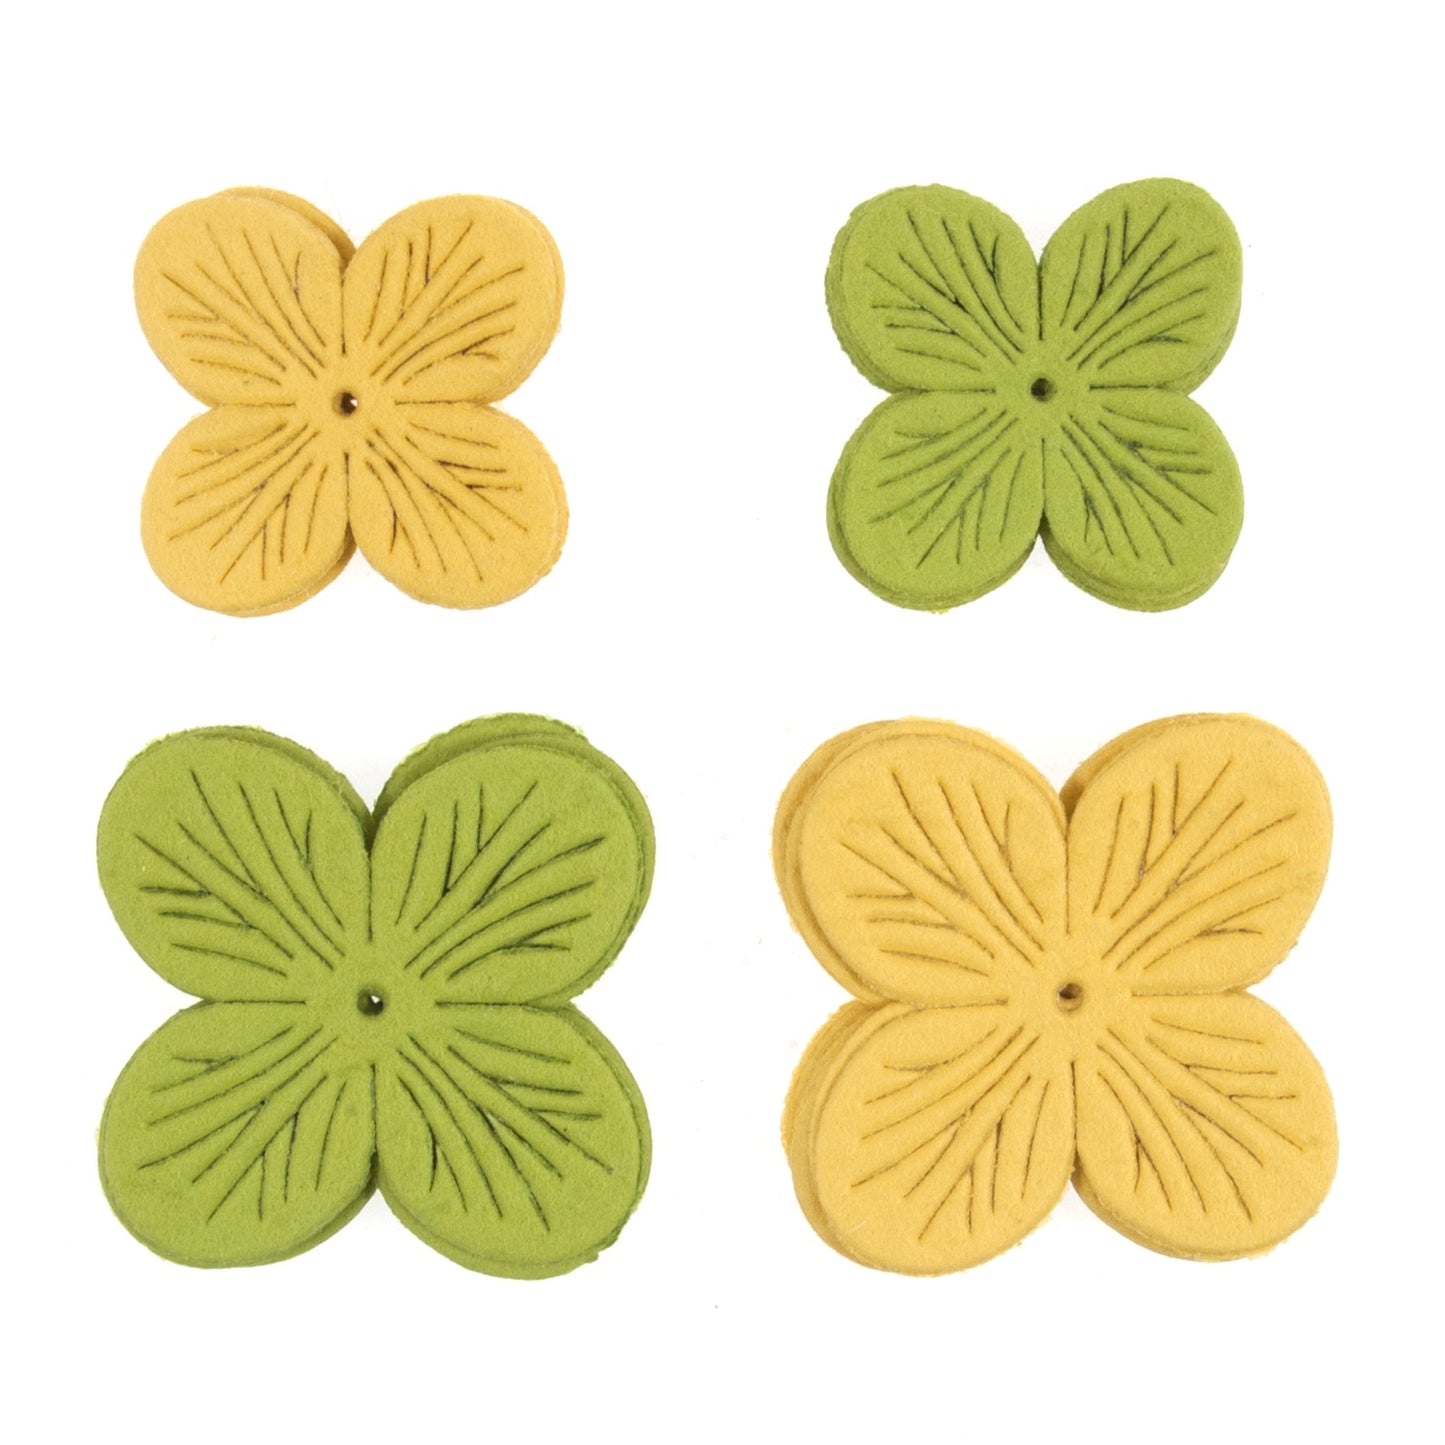 CRAFT EMBELLISHMENTS - DECOUPAGE FLOWERS - Green & Yellow - Pack of 16 pcs